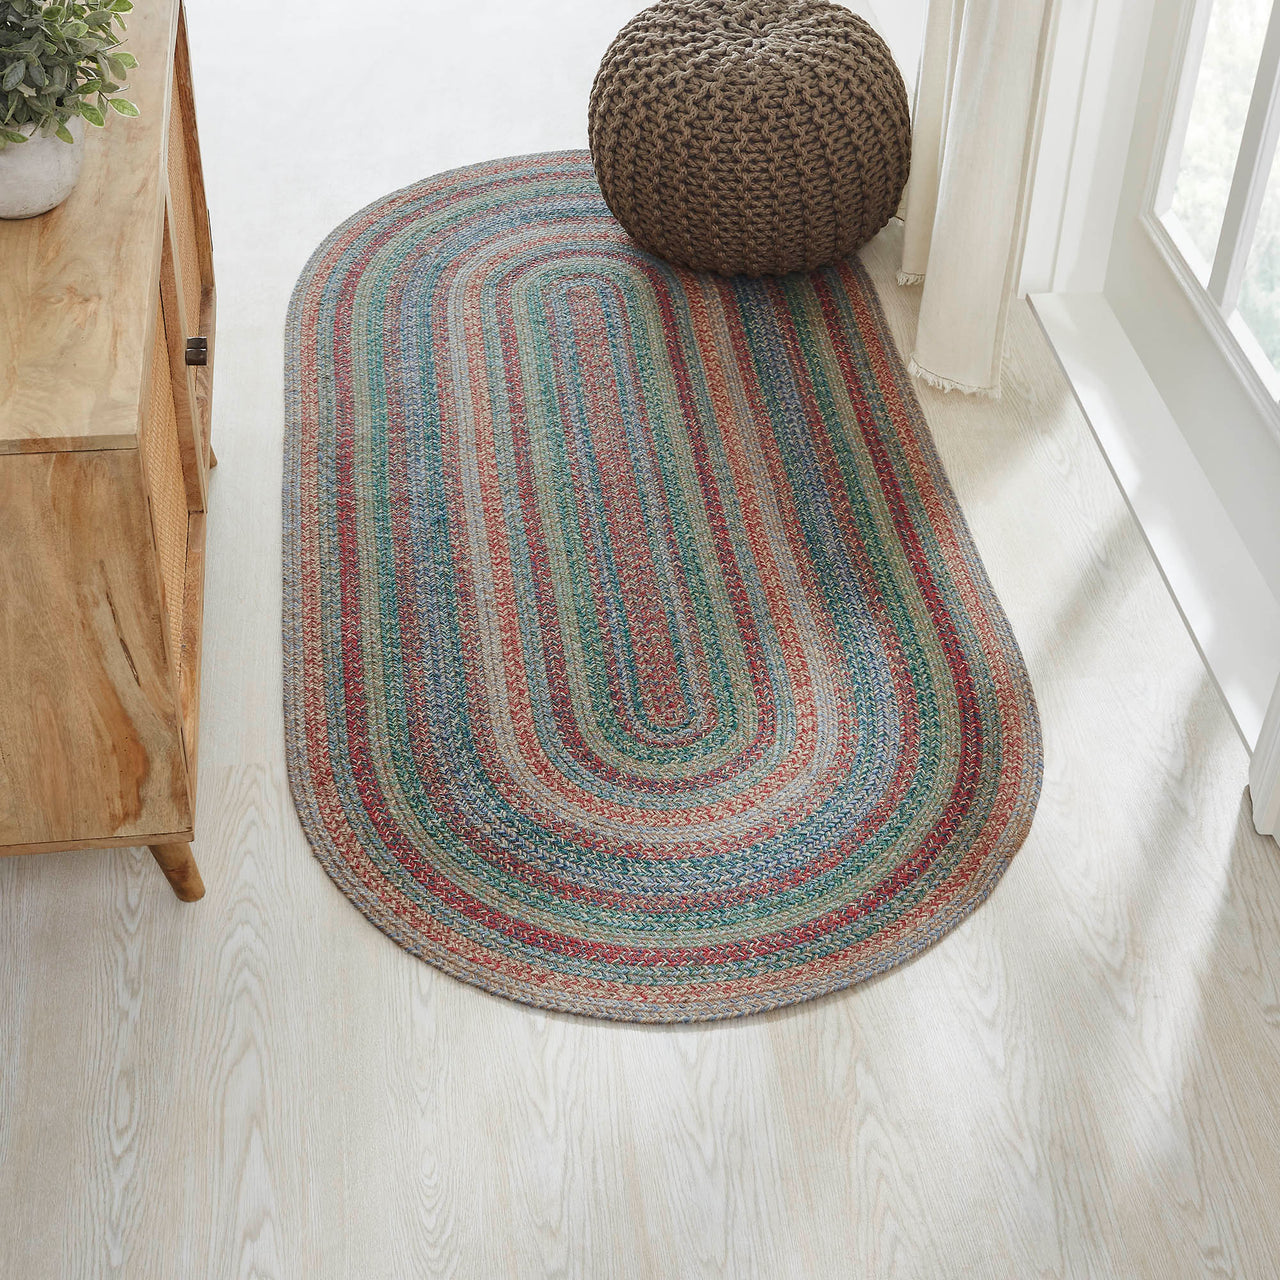 Multi Braided Jute Oval Braided Rugs with Rug Pad - VHC Brands